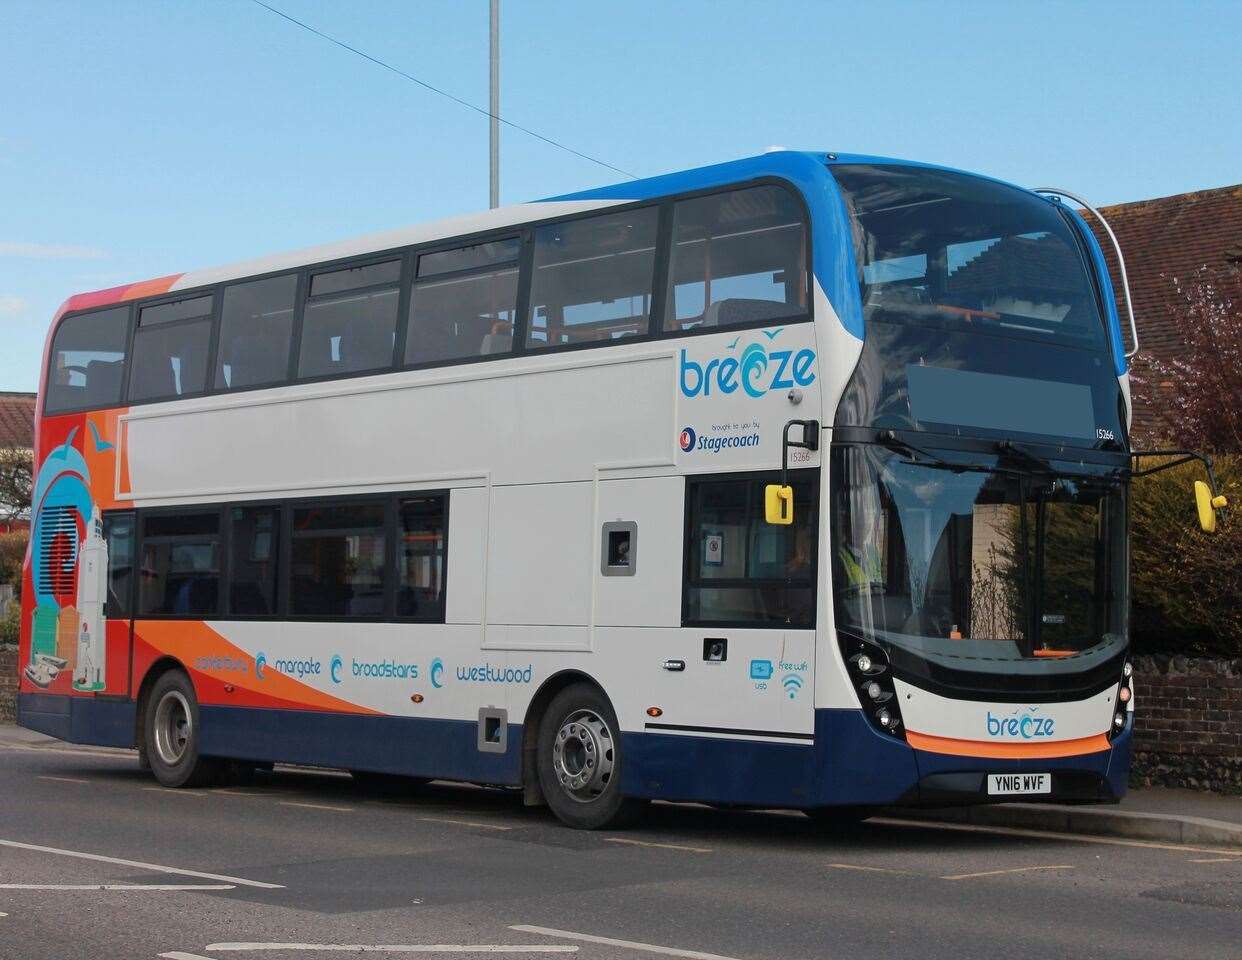 Stagecoach South East has adjusted its timetable in response to government restrictions on non-essential travel